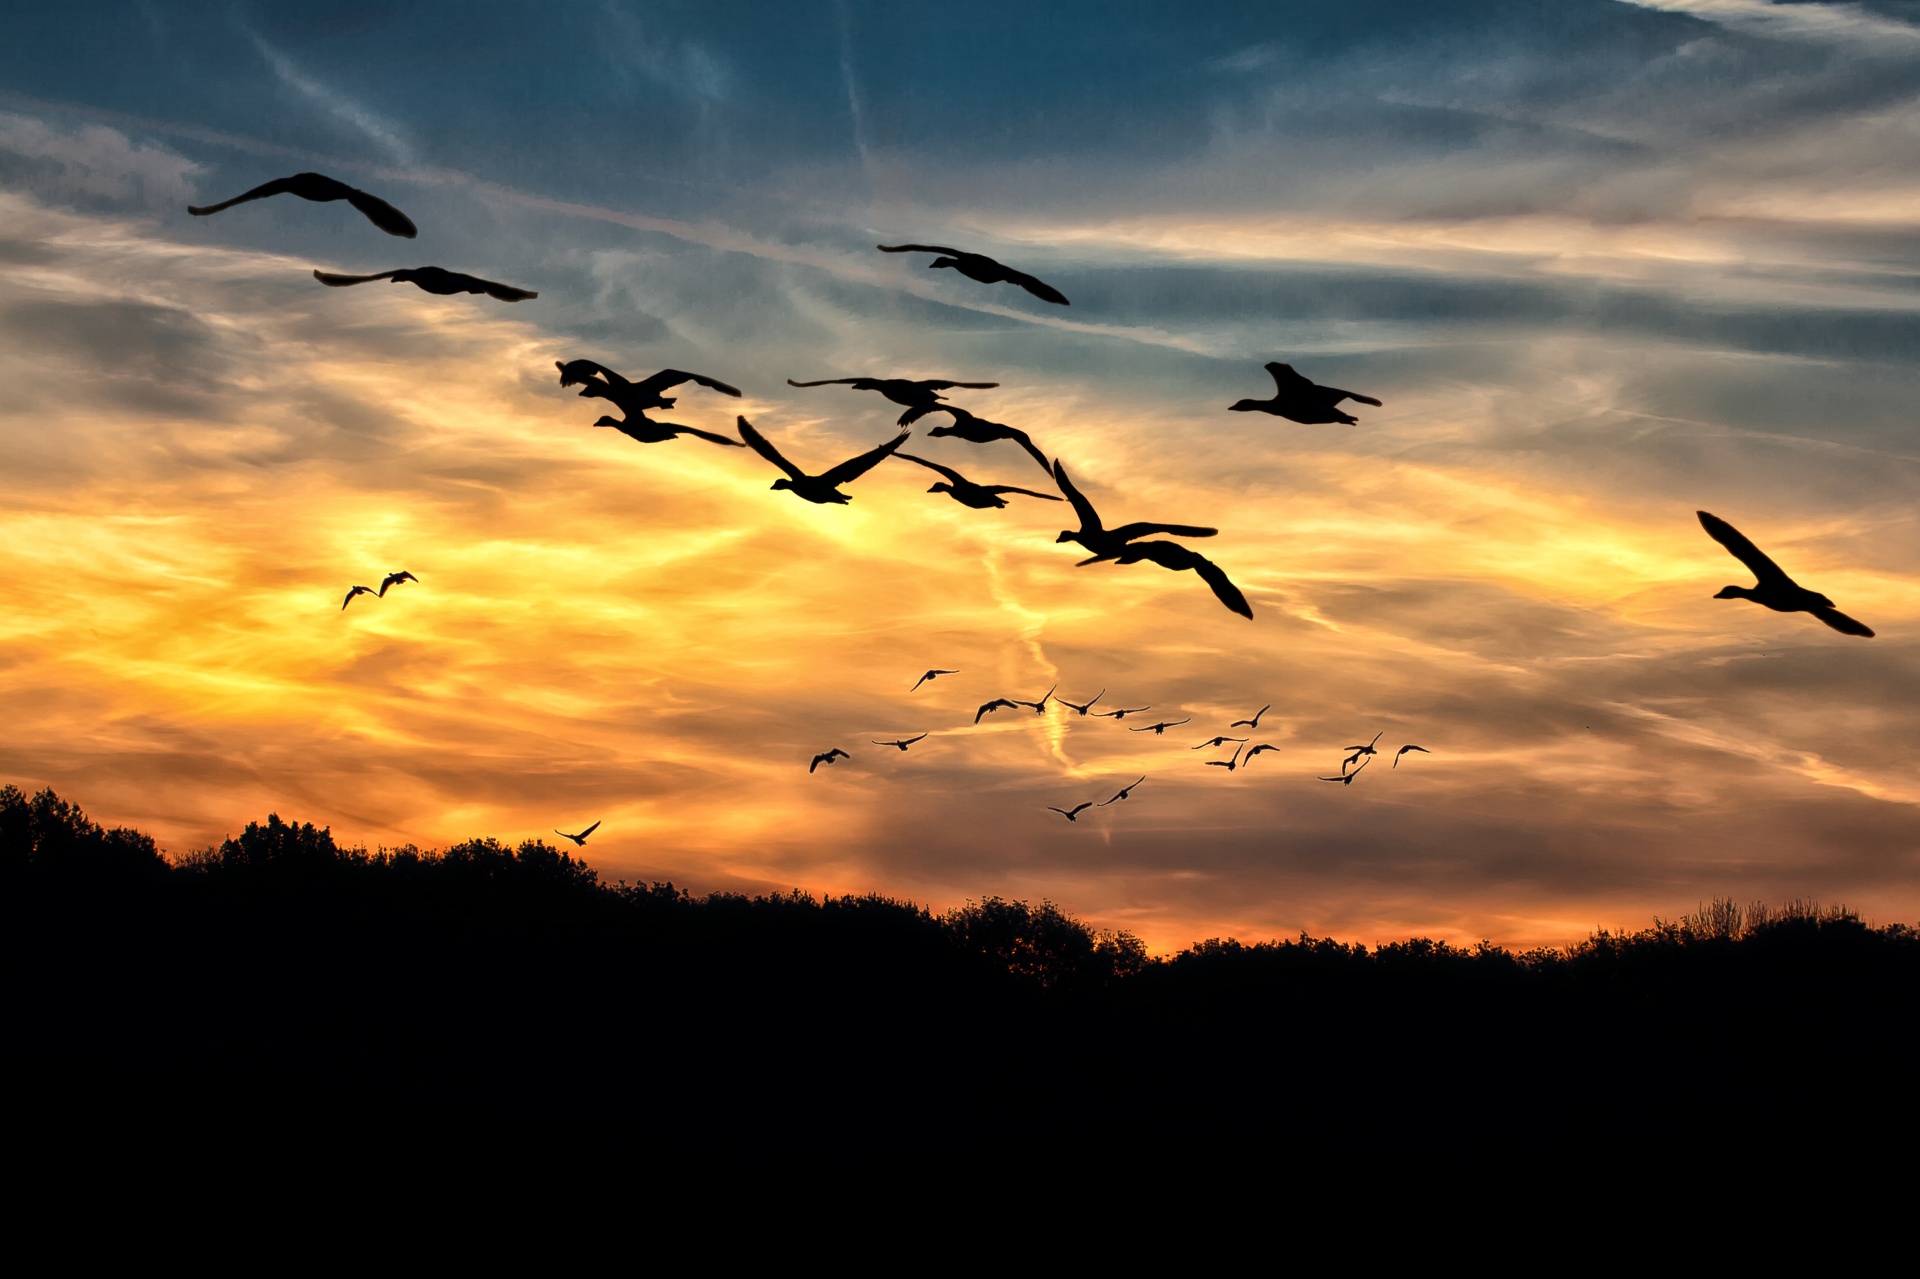 geese, sunset, bright, swarm, wild geese, sky, migrating birds, flying, clouds form, formation, beautiful, sunset flock of birds, clouds, birds, evening sky,